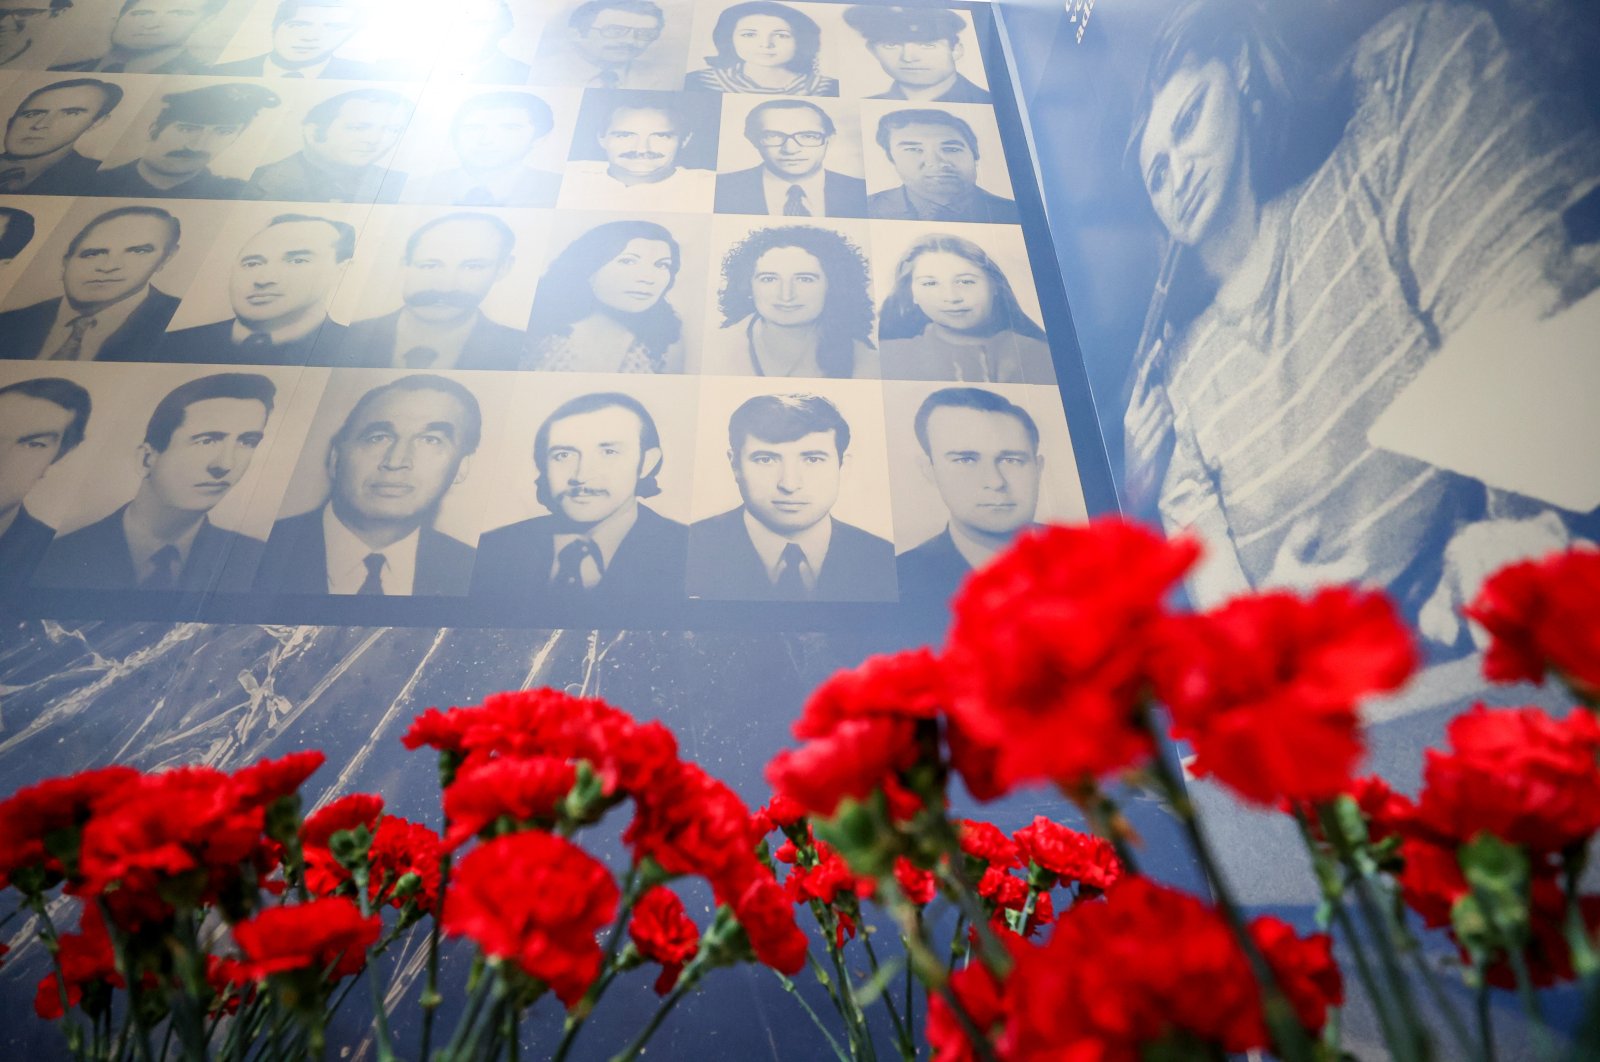 Turkey's Directorate of Communications opens an exhibition in memory of Turkish diplomats killed by Armenian terrorists, in Los Angeles, U.S., April 24, 2021. (AA)